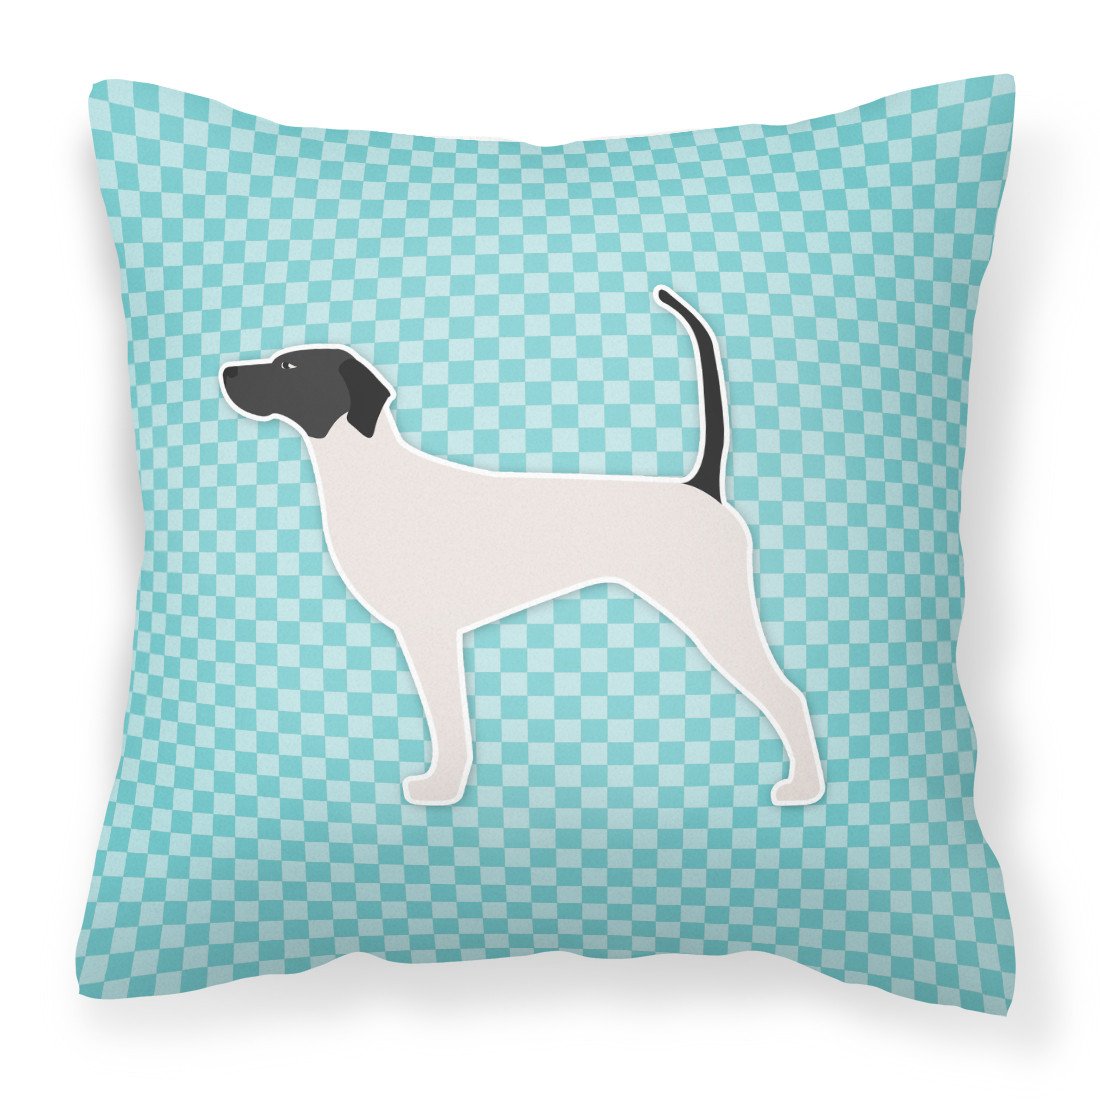 English Pointer  Checkerboard Blue Fabric Decorative Pillow BB3695PW1818 by Caroline's Treasures